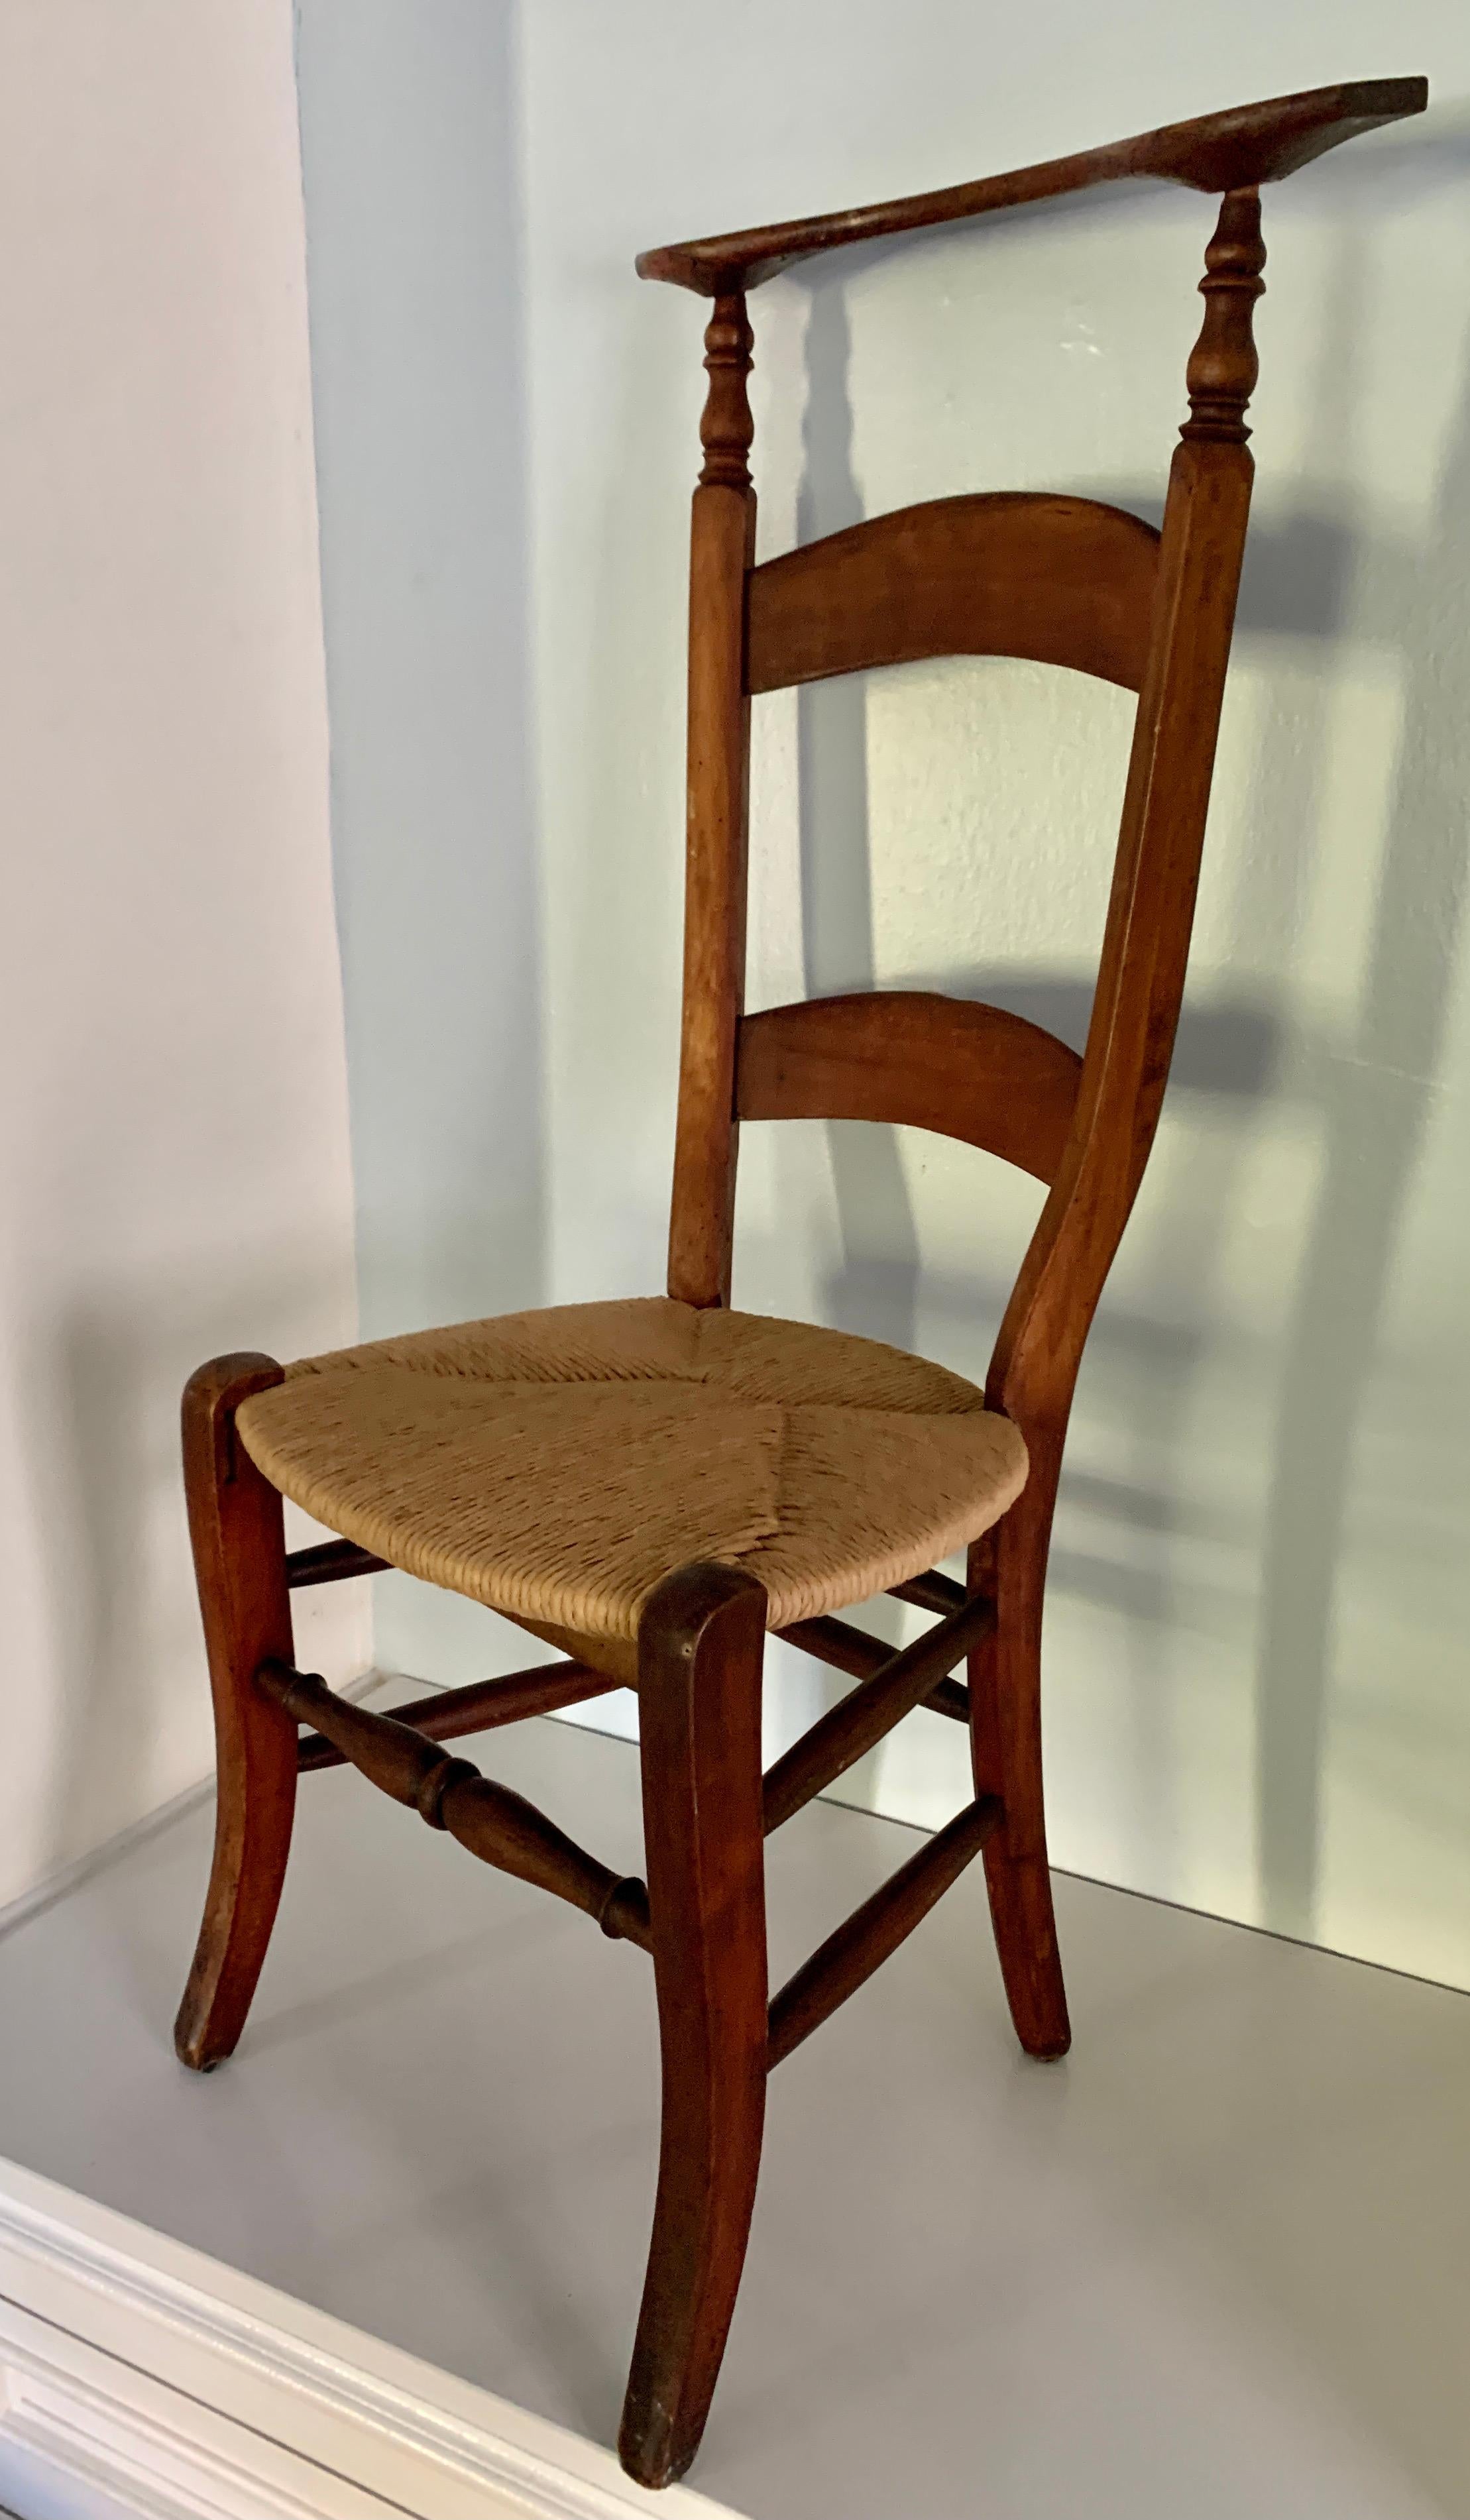 19th Century 19th C. Prie Dieu Chair For Sale